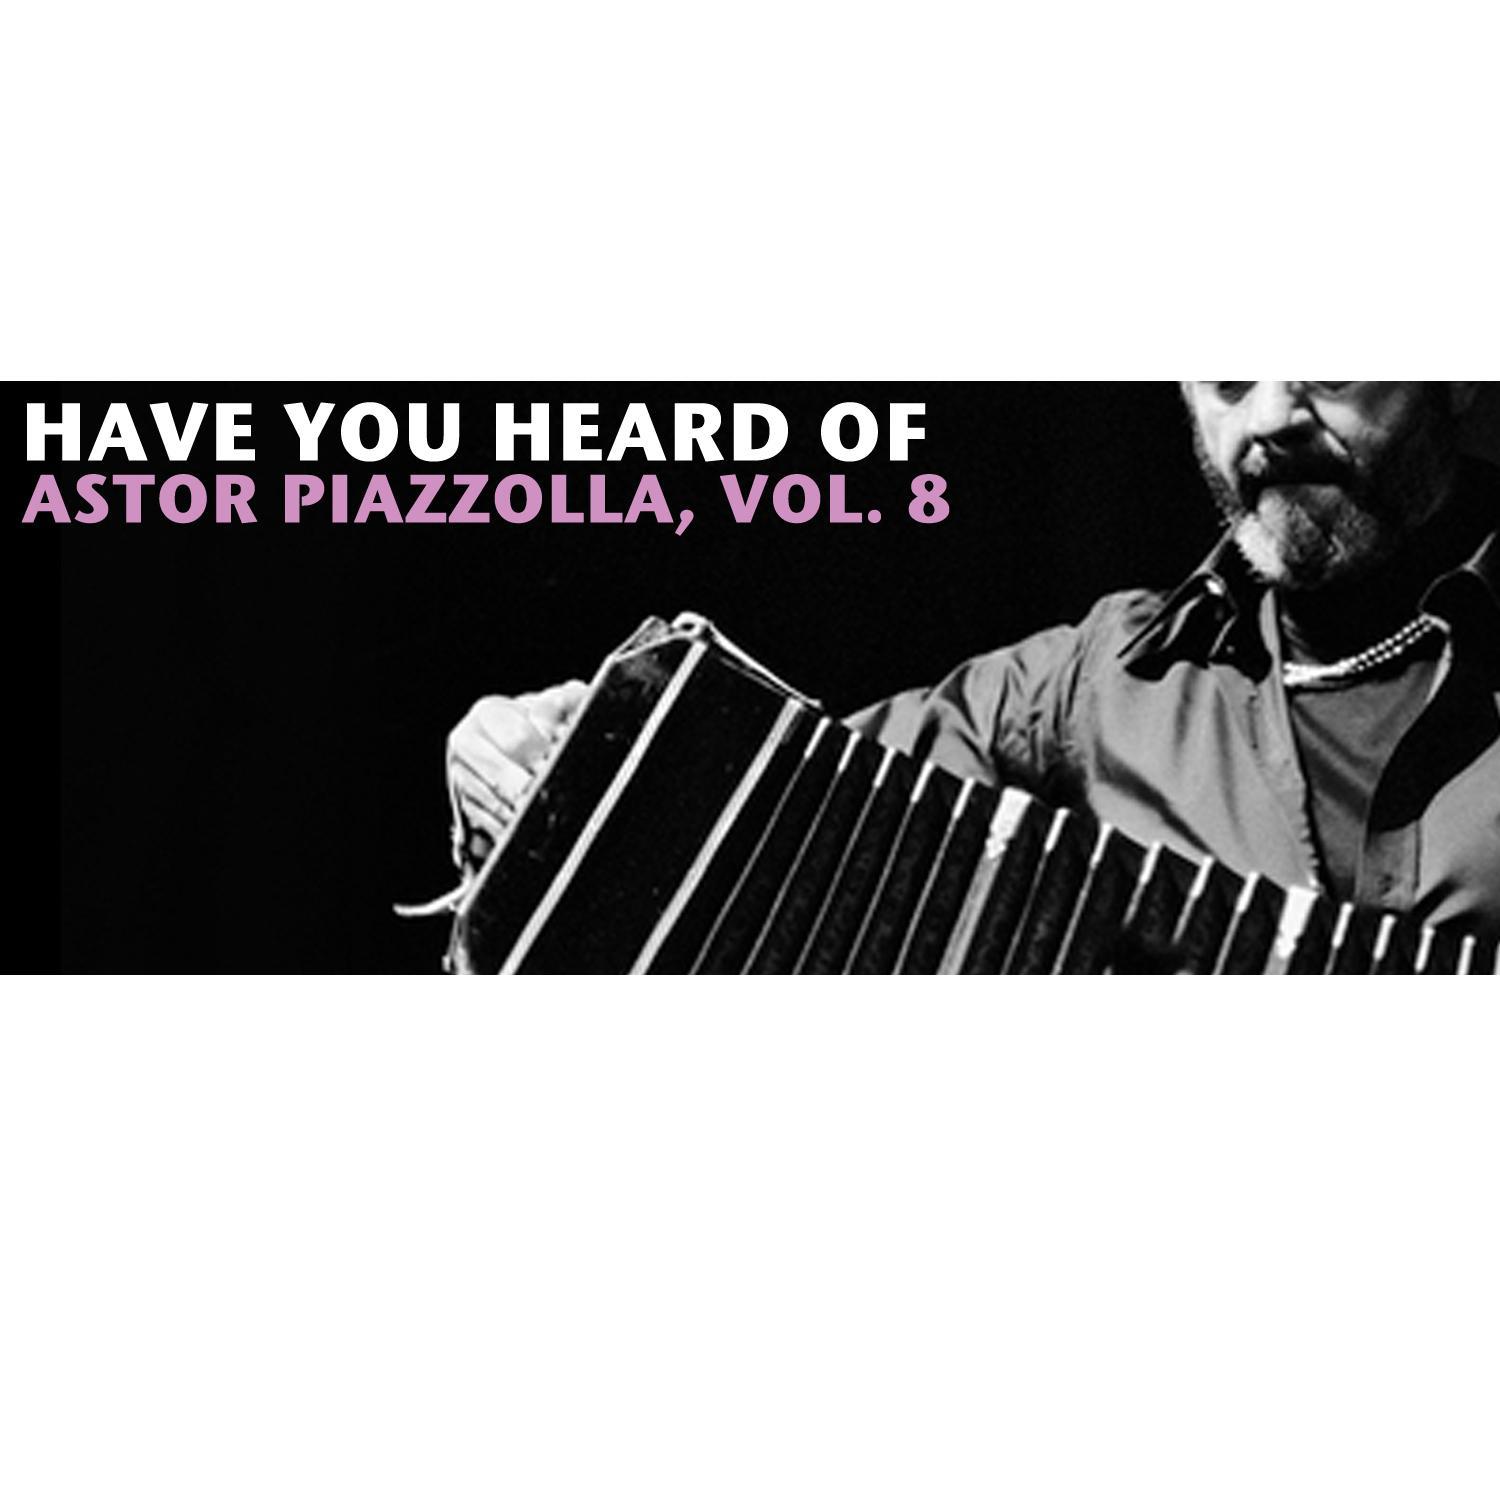 Have You Heard Of Astor Piazzolla, Vol. 8